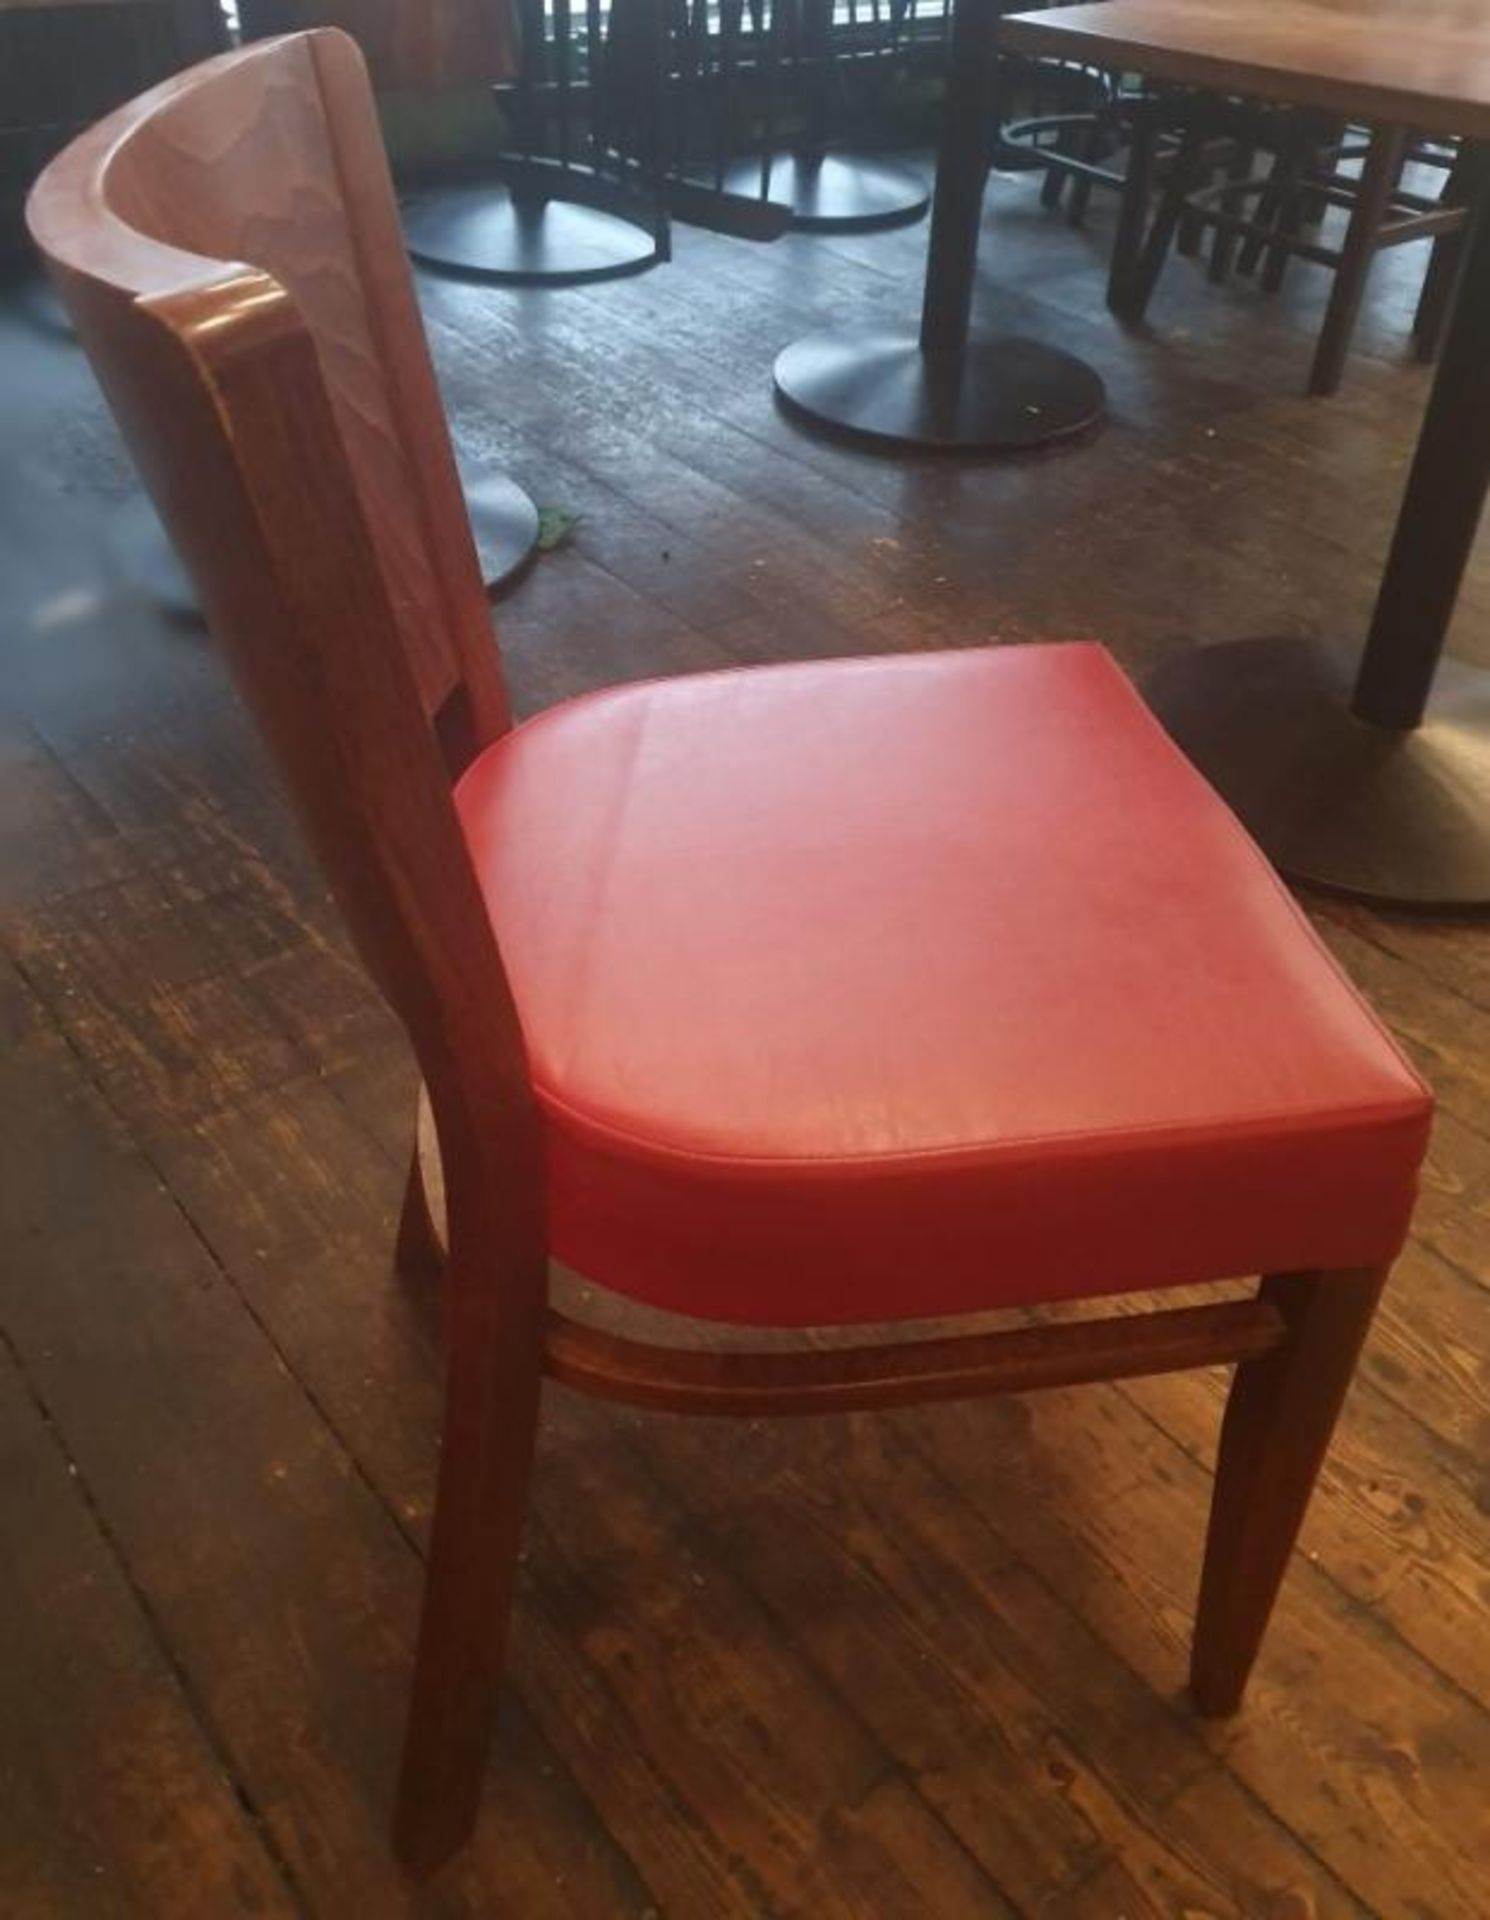 6 x Wooden Dining Chairs With Upholstered Seat Cushions In Red - Recently Taken From A Contemporary - Image 2 of 6